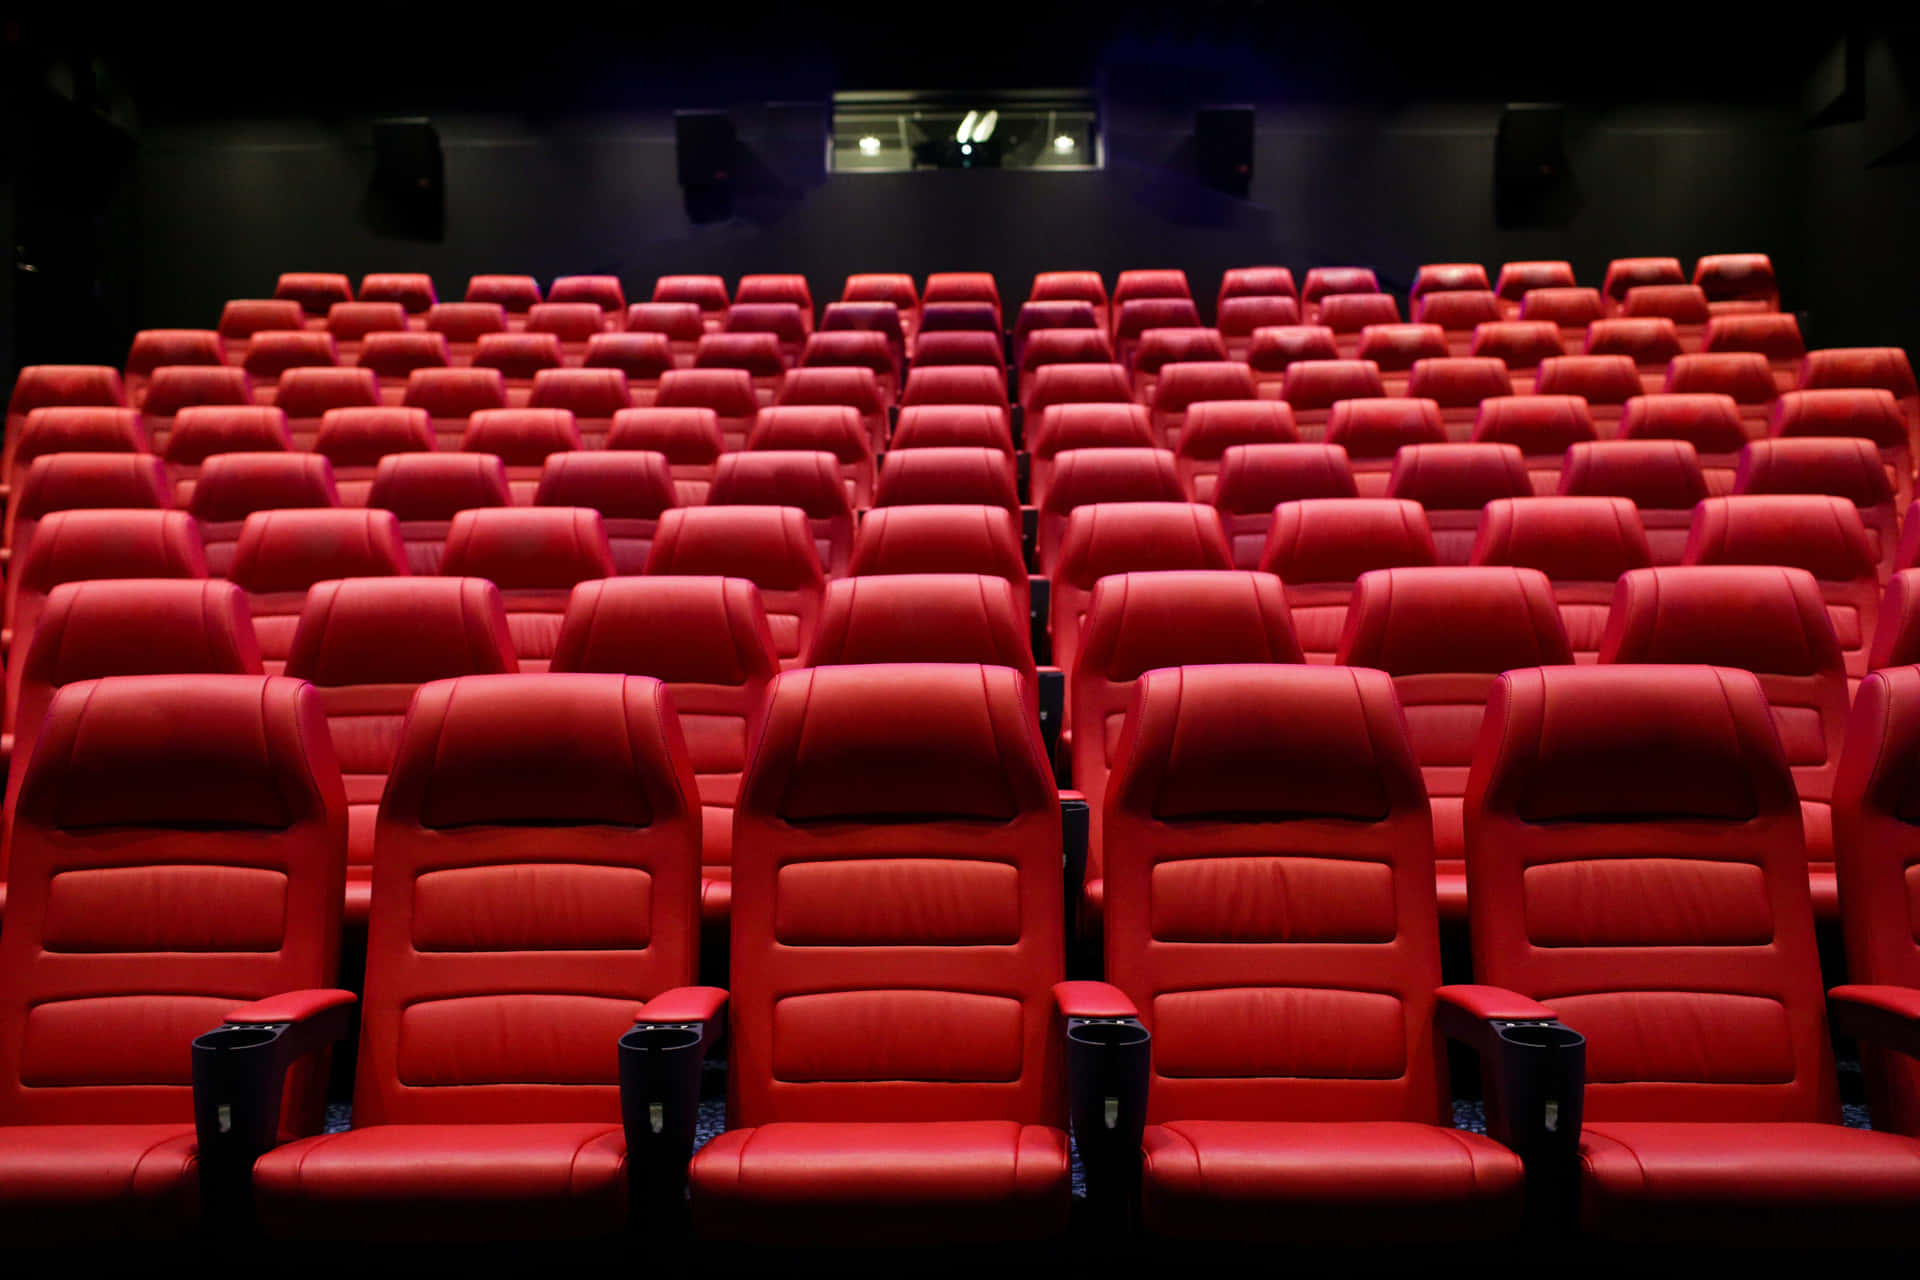 Movie Theater With Red Premium Leather Seats Wallpaper